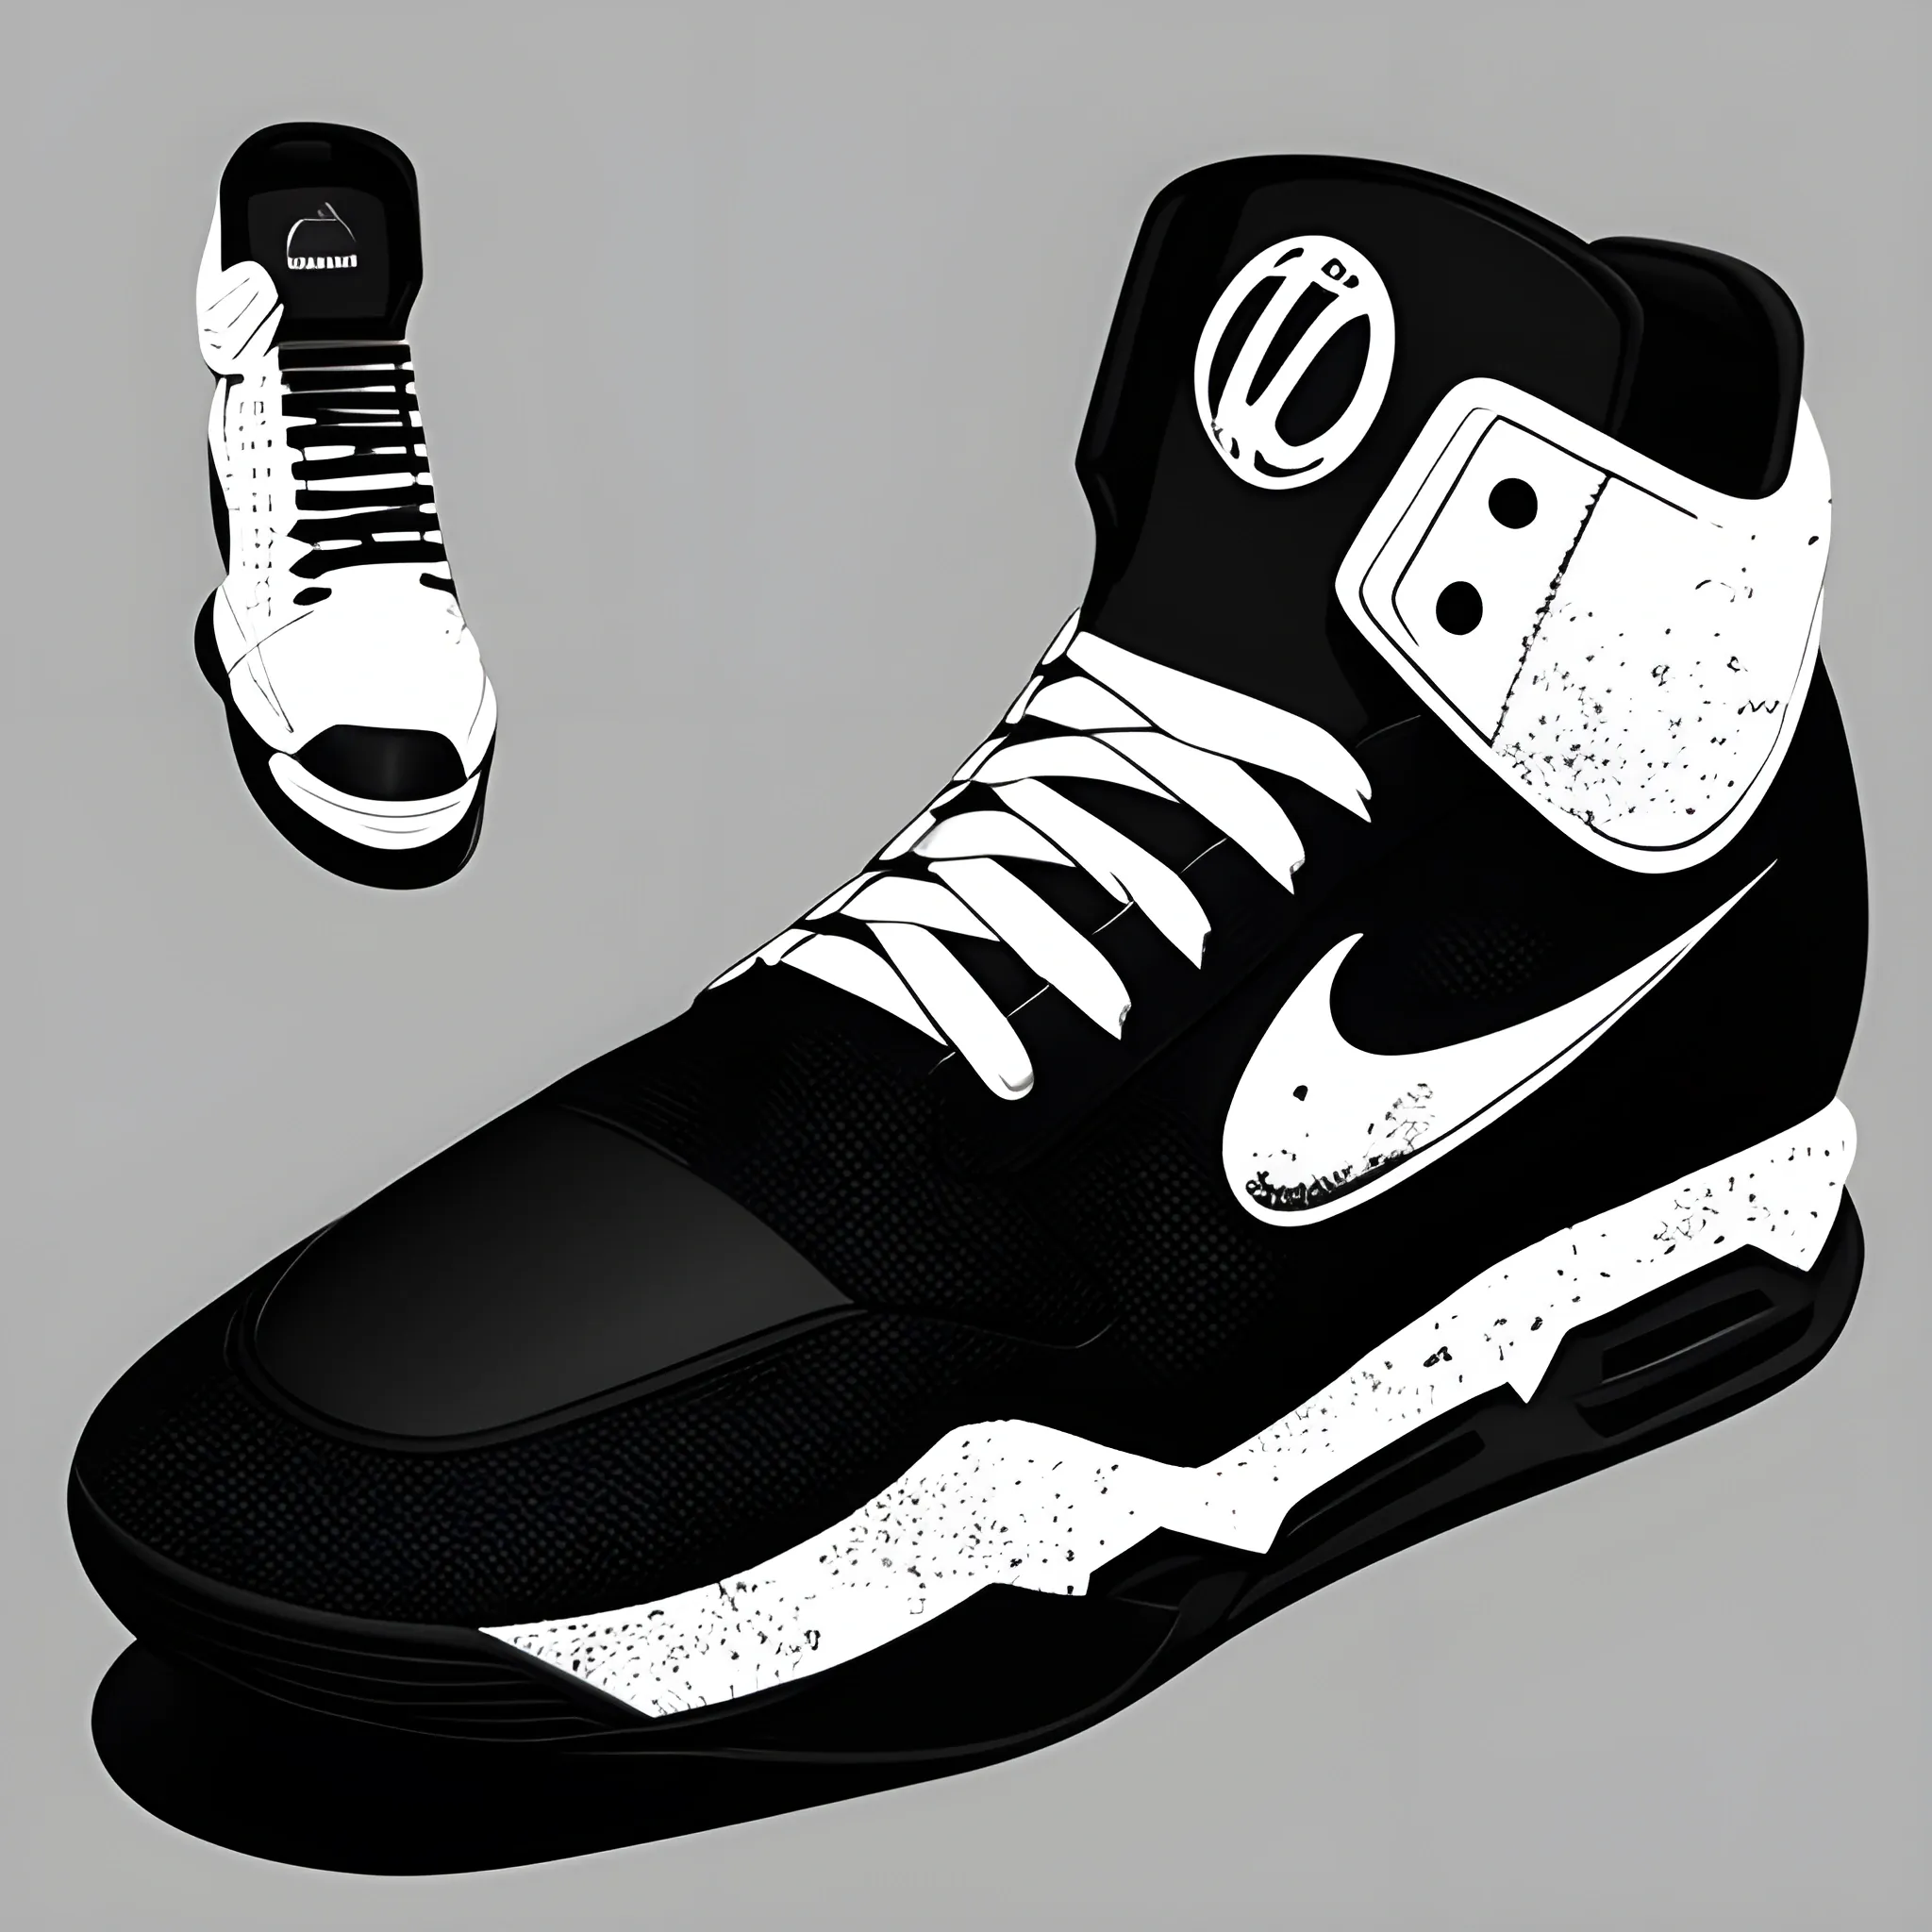 Concept Moon Knight basketball sneakers, popular in art station, mid-top, bloated, smooth, sharp focus
